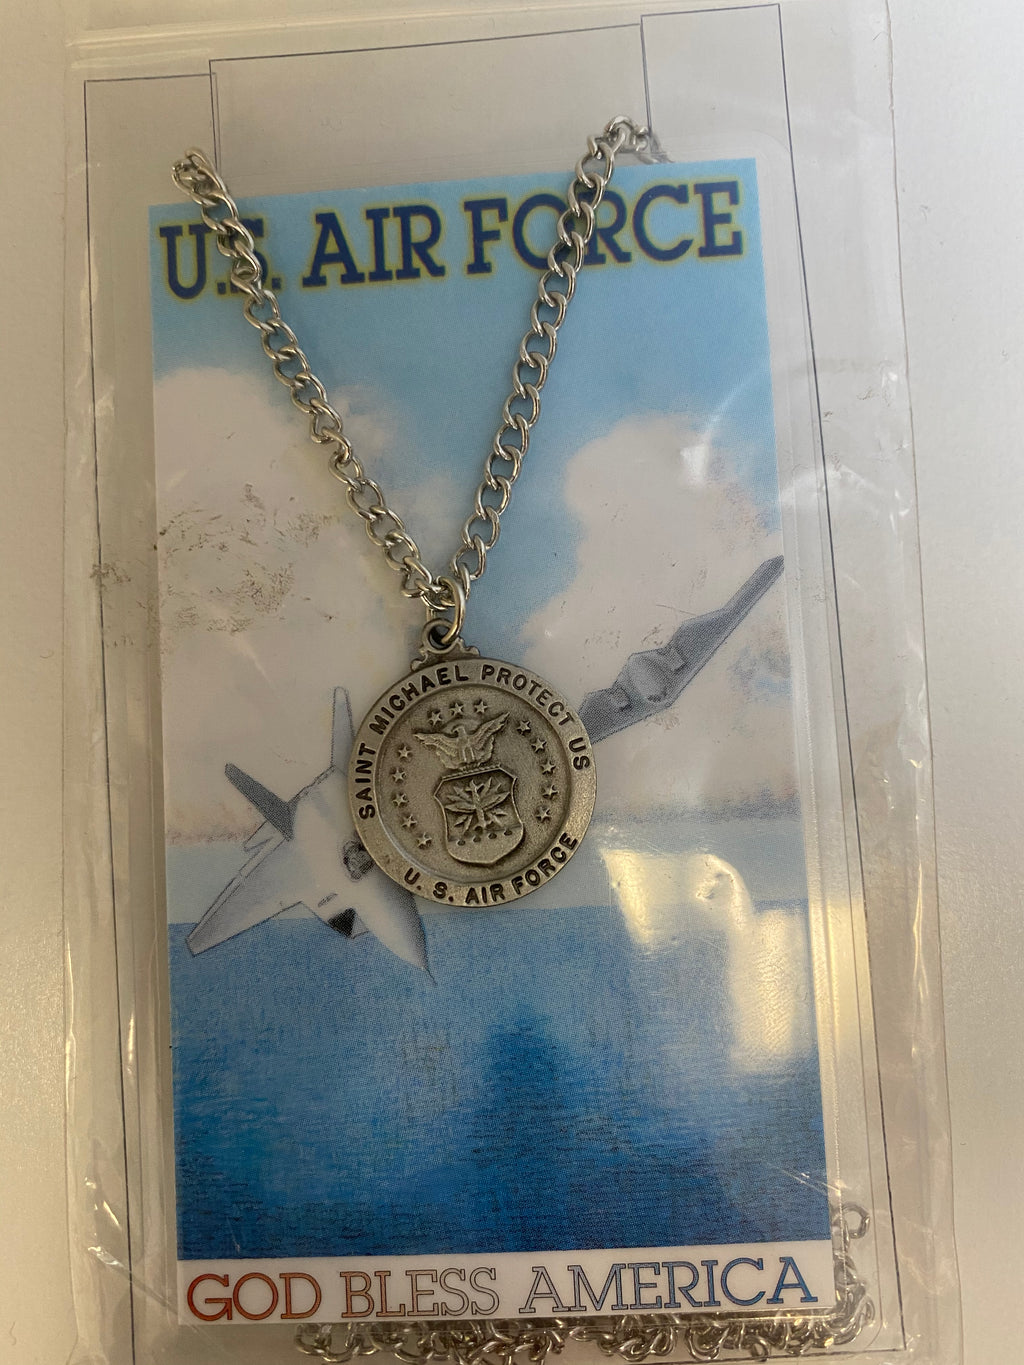 US Air Force medal and prayer card